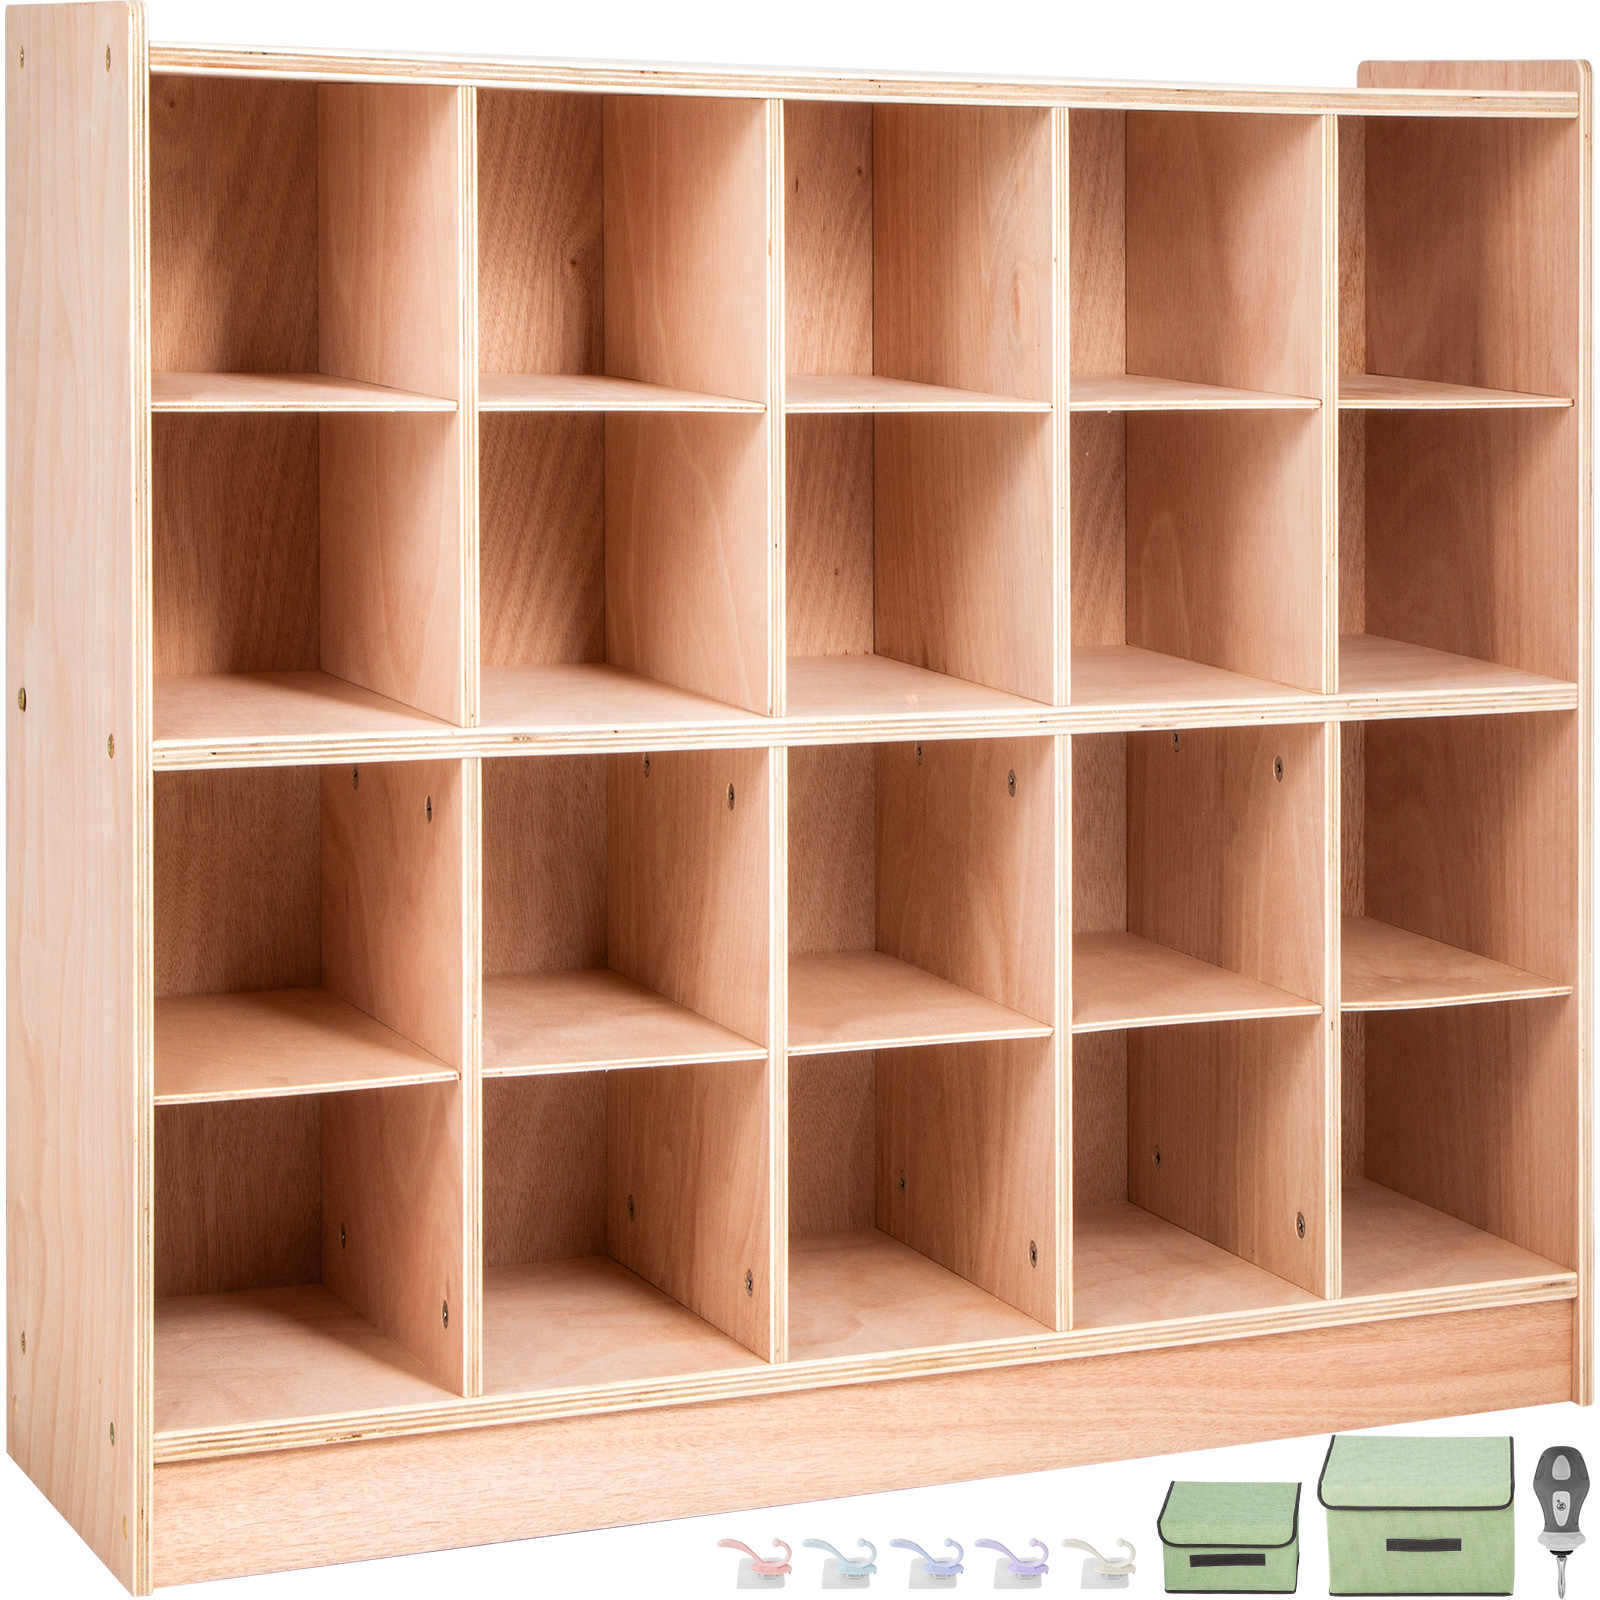 5-Section,48.4 Inch High,Classroom